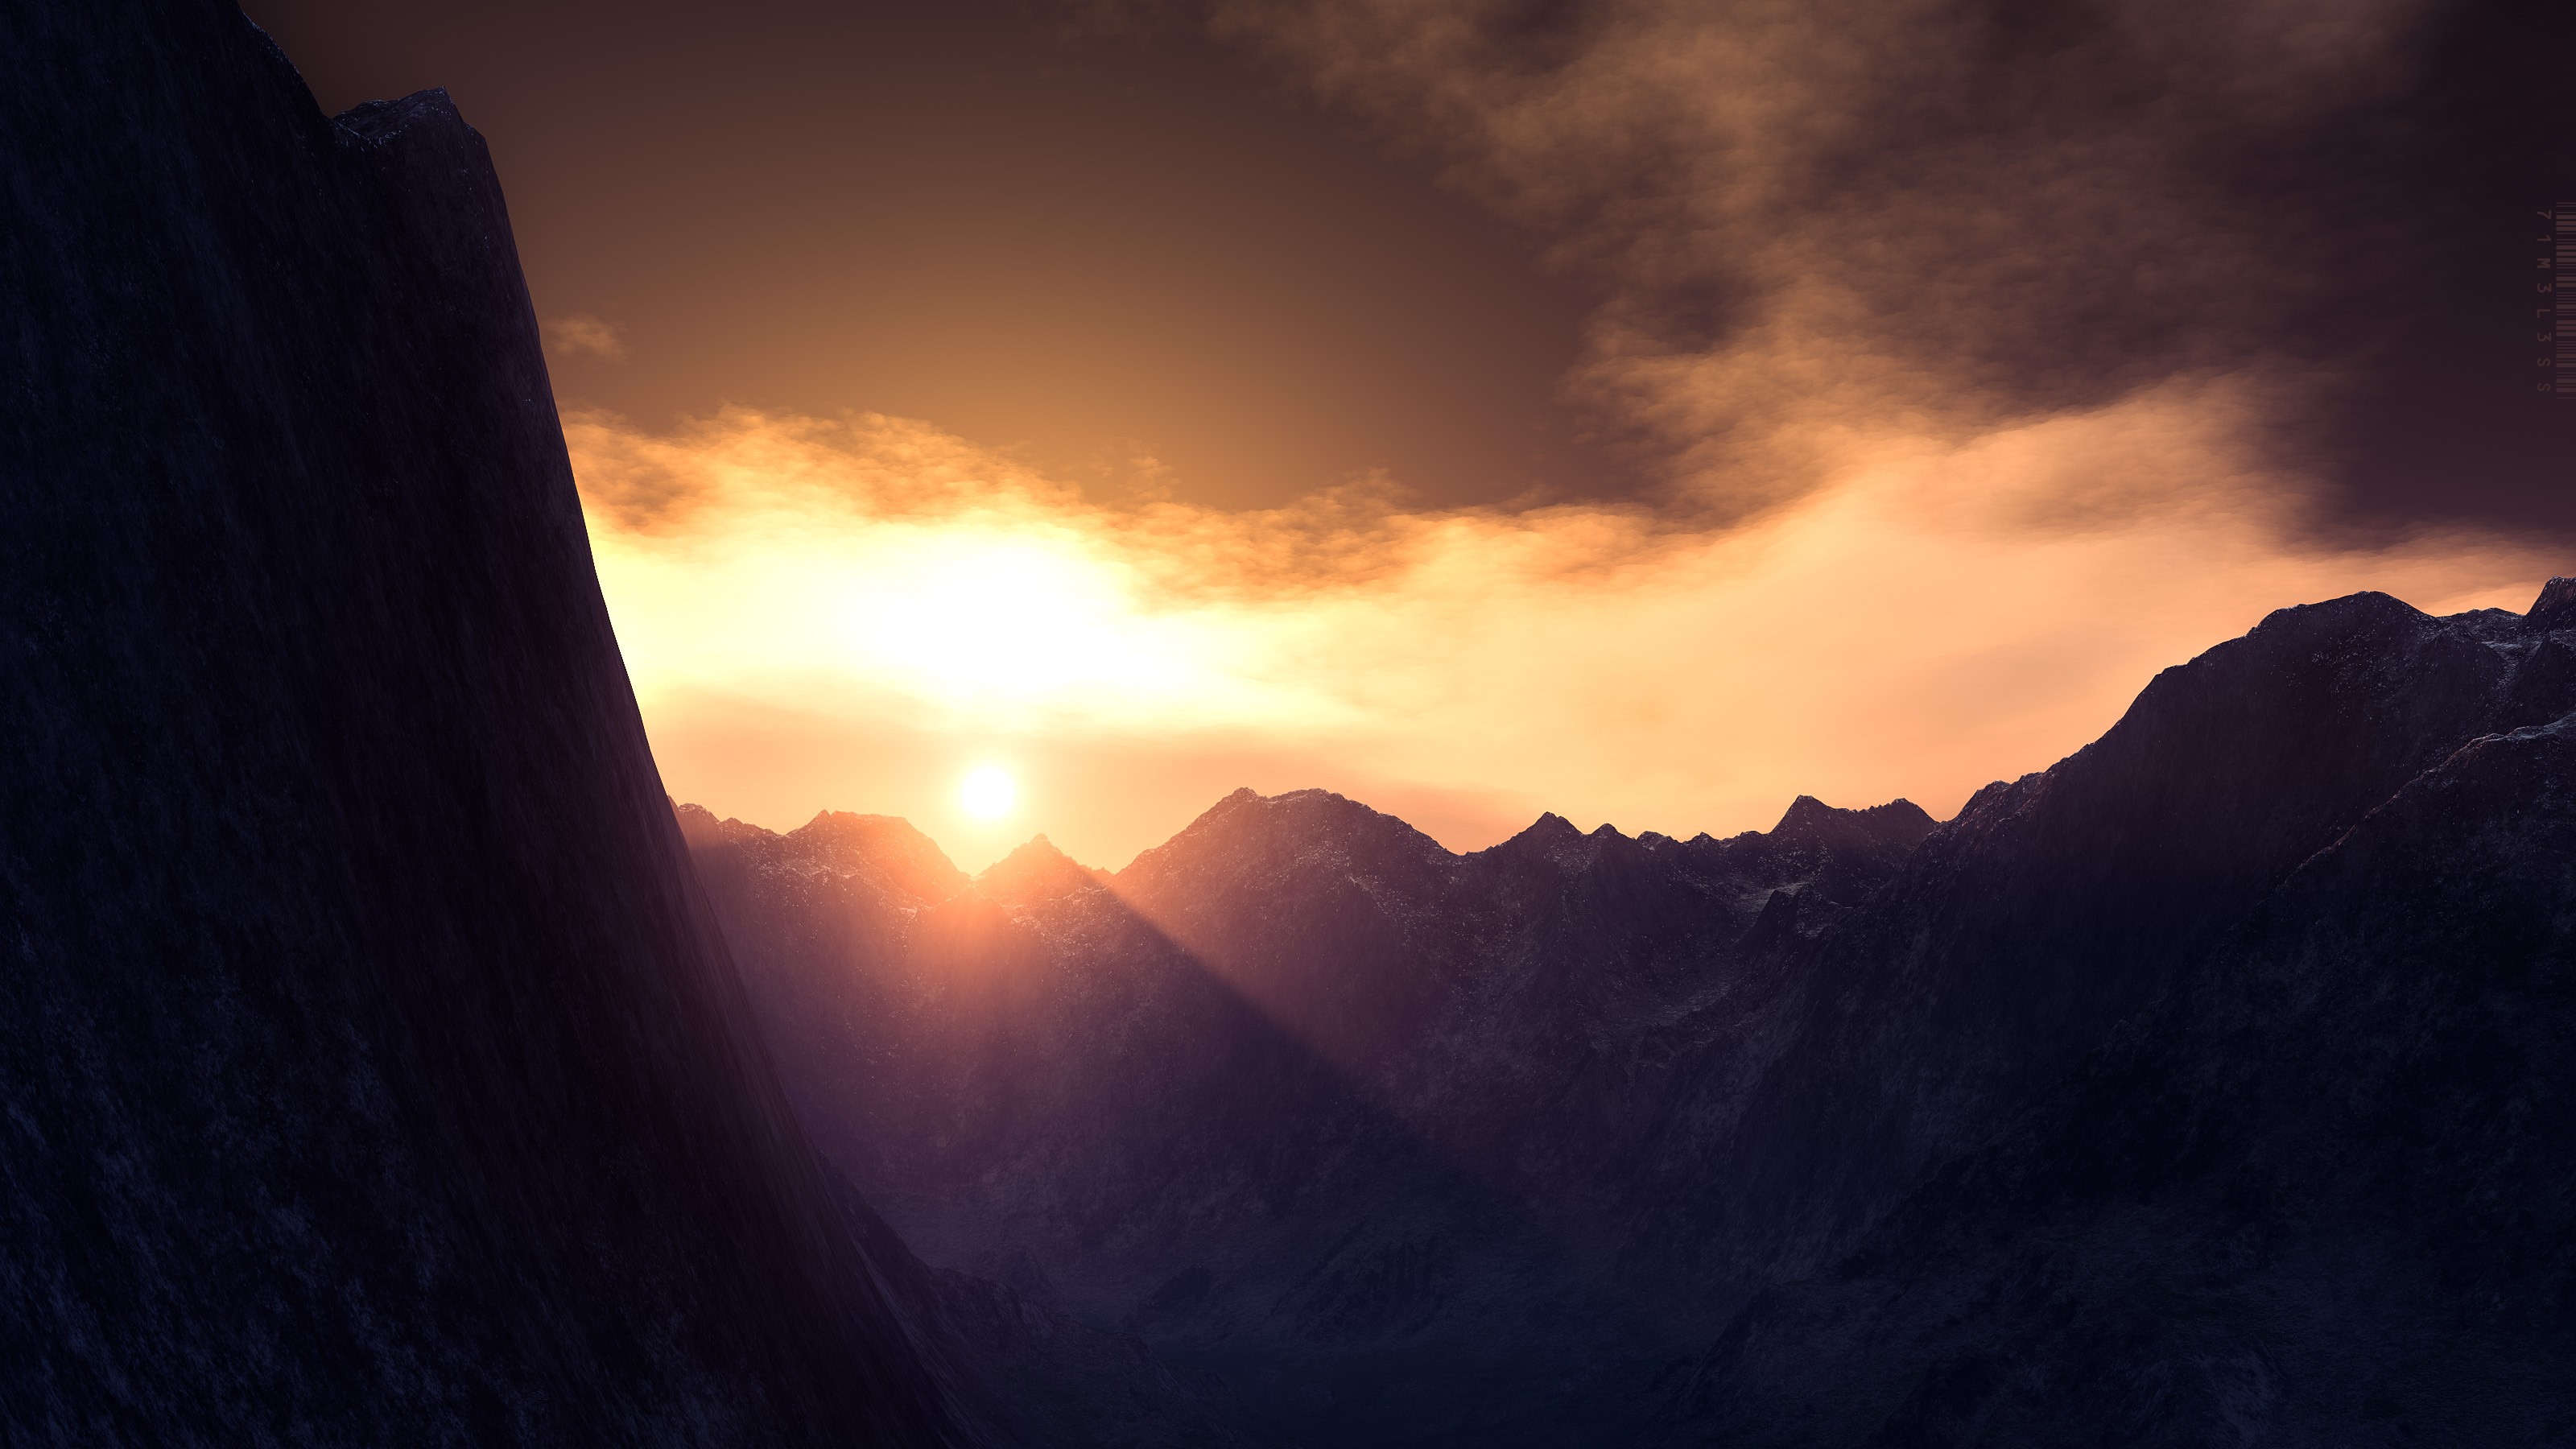 General 3200x1800 CGI mountains sky sunlight cliff